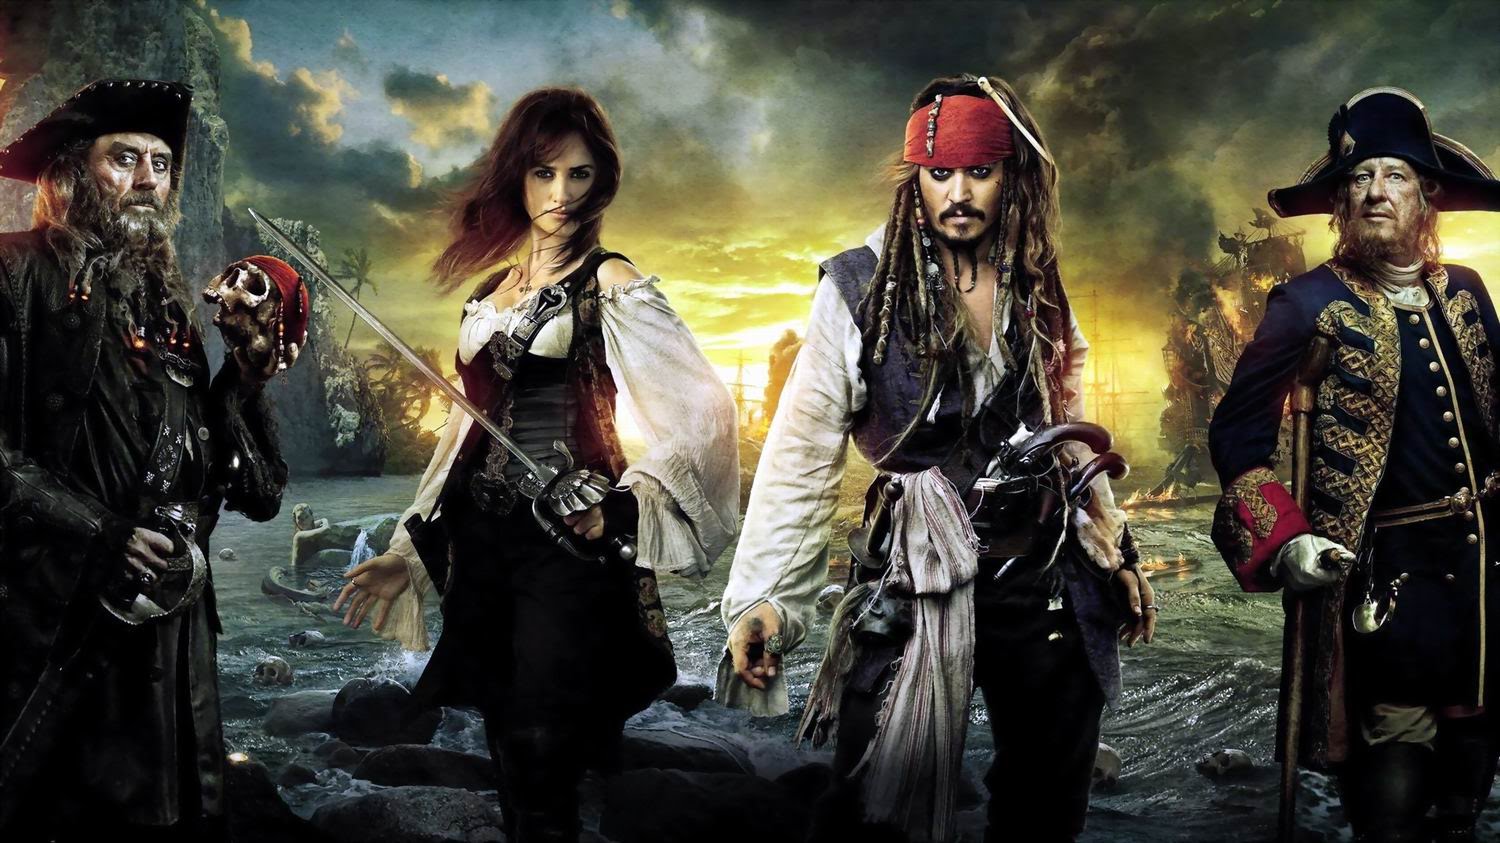 1500x843 > Pirates Of The Caribbean: On Stranger Tides Wallpapers